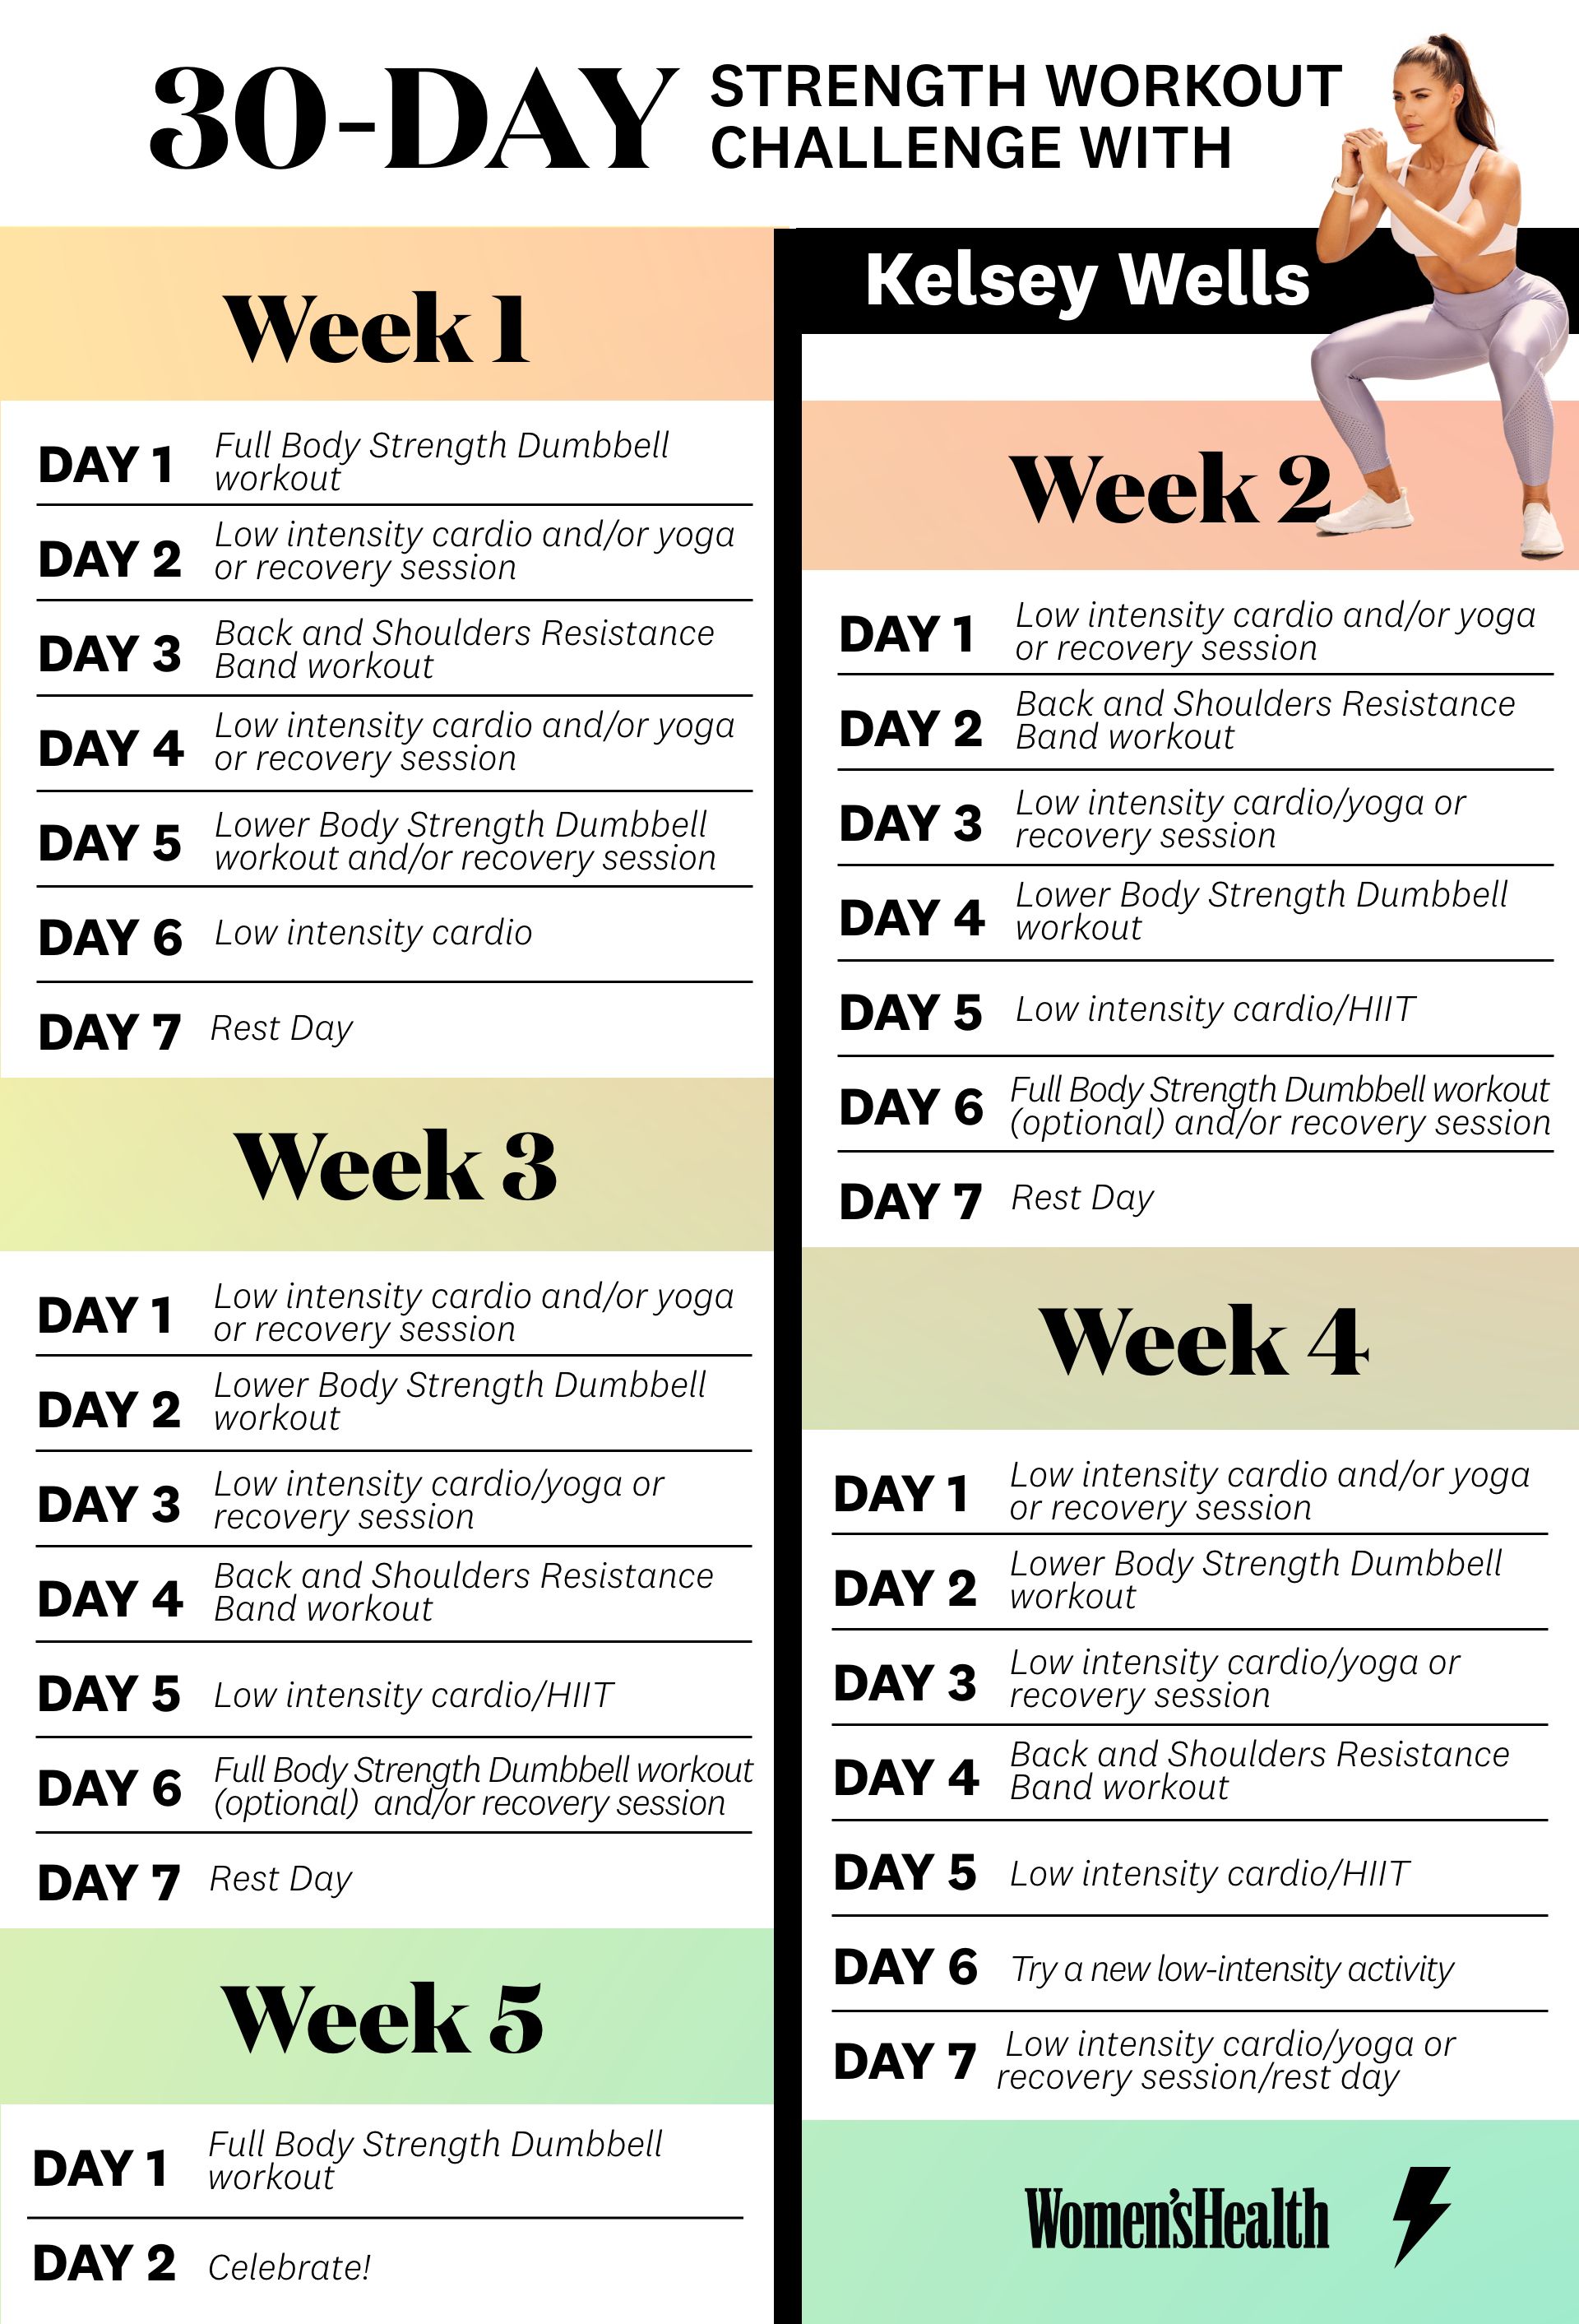 30 Day Beginners Home Workout Challenge For Weight Loss | EOUA Blog